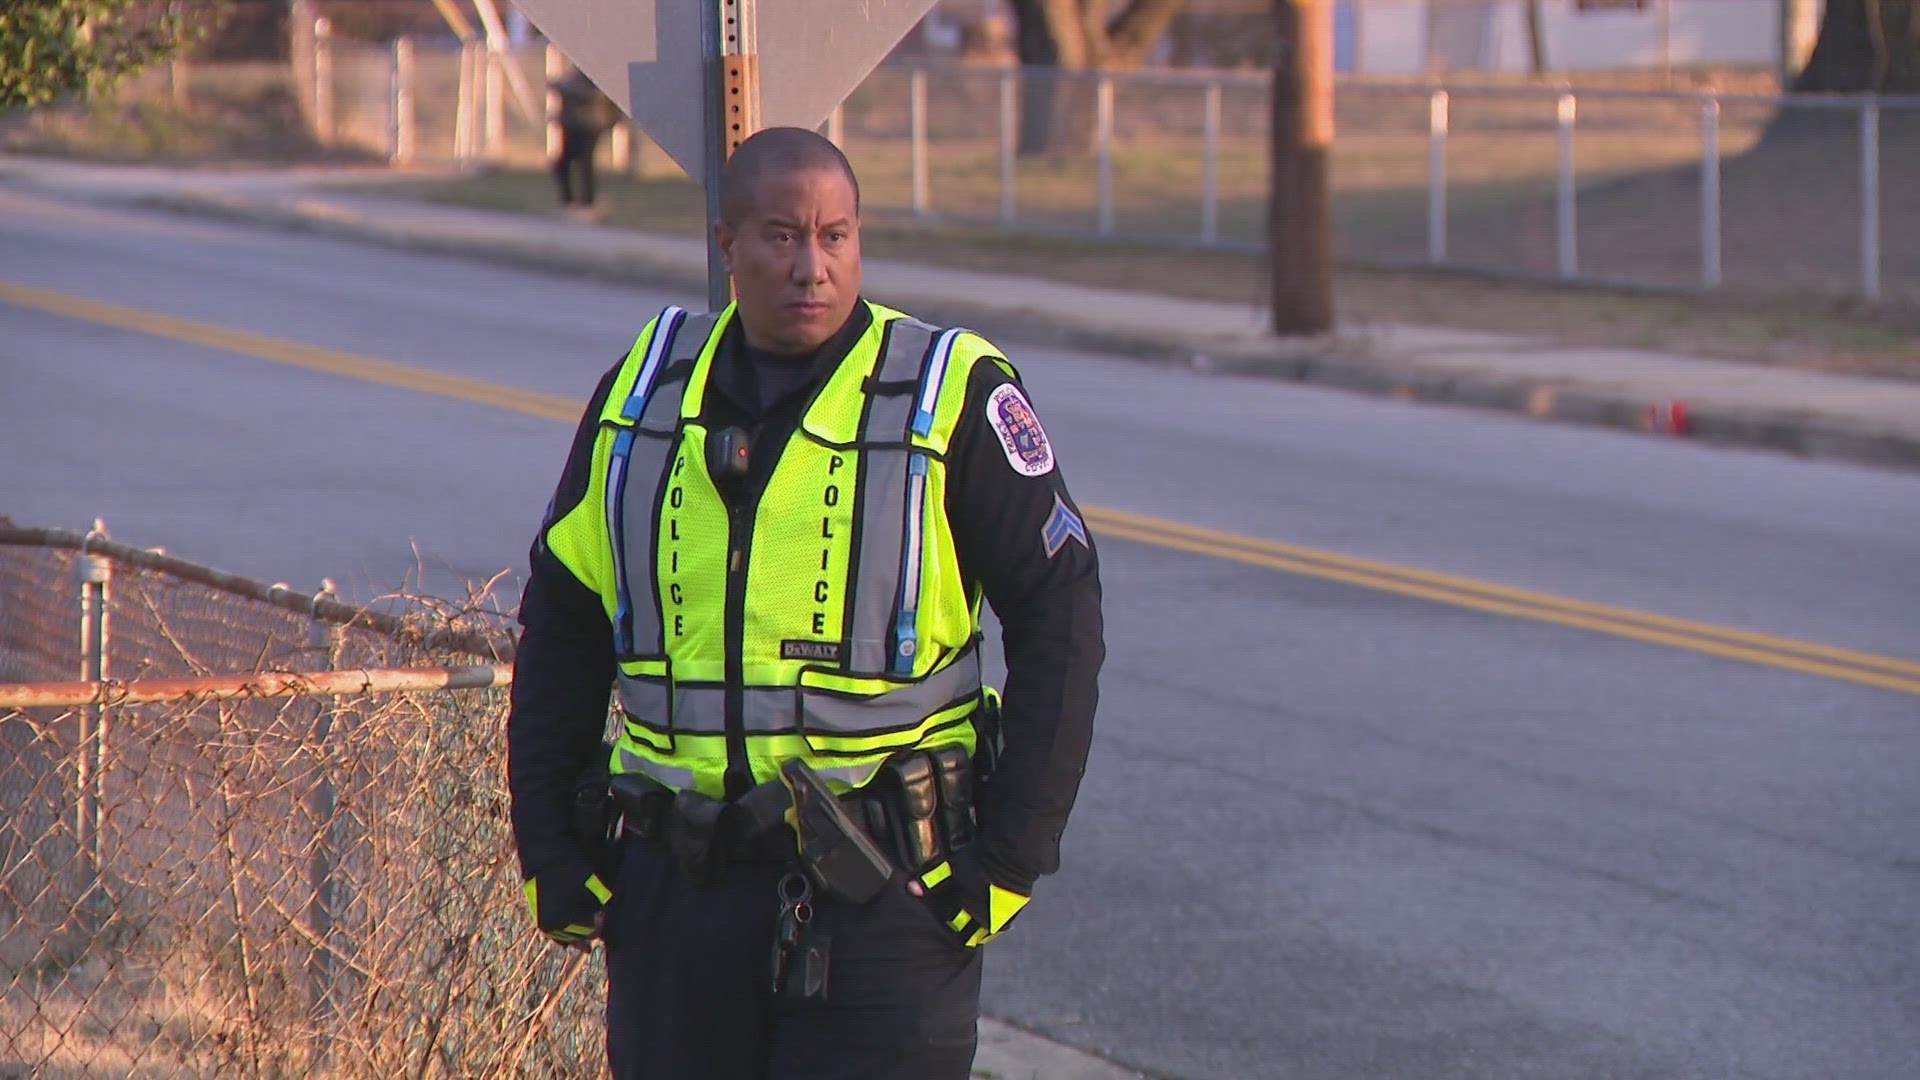 Police Executive Command staff and police officers will be stationed at uncovered locations until dedicated crossing guards are hired.